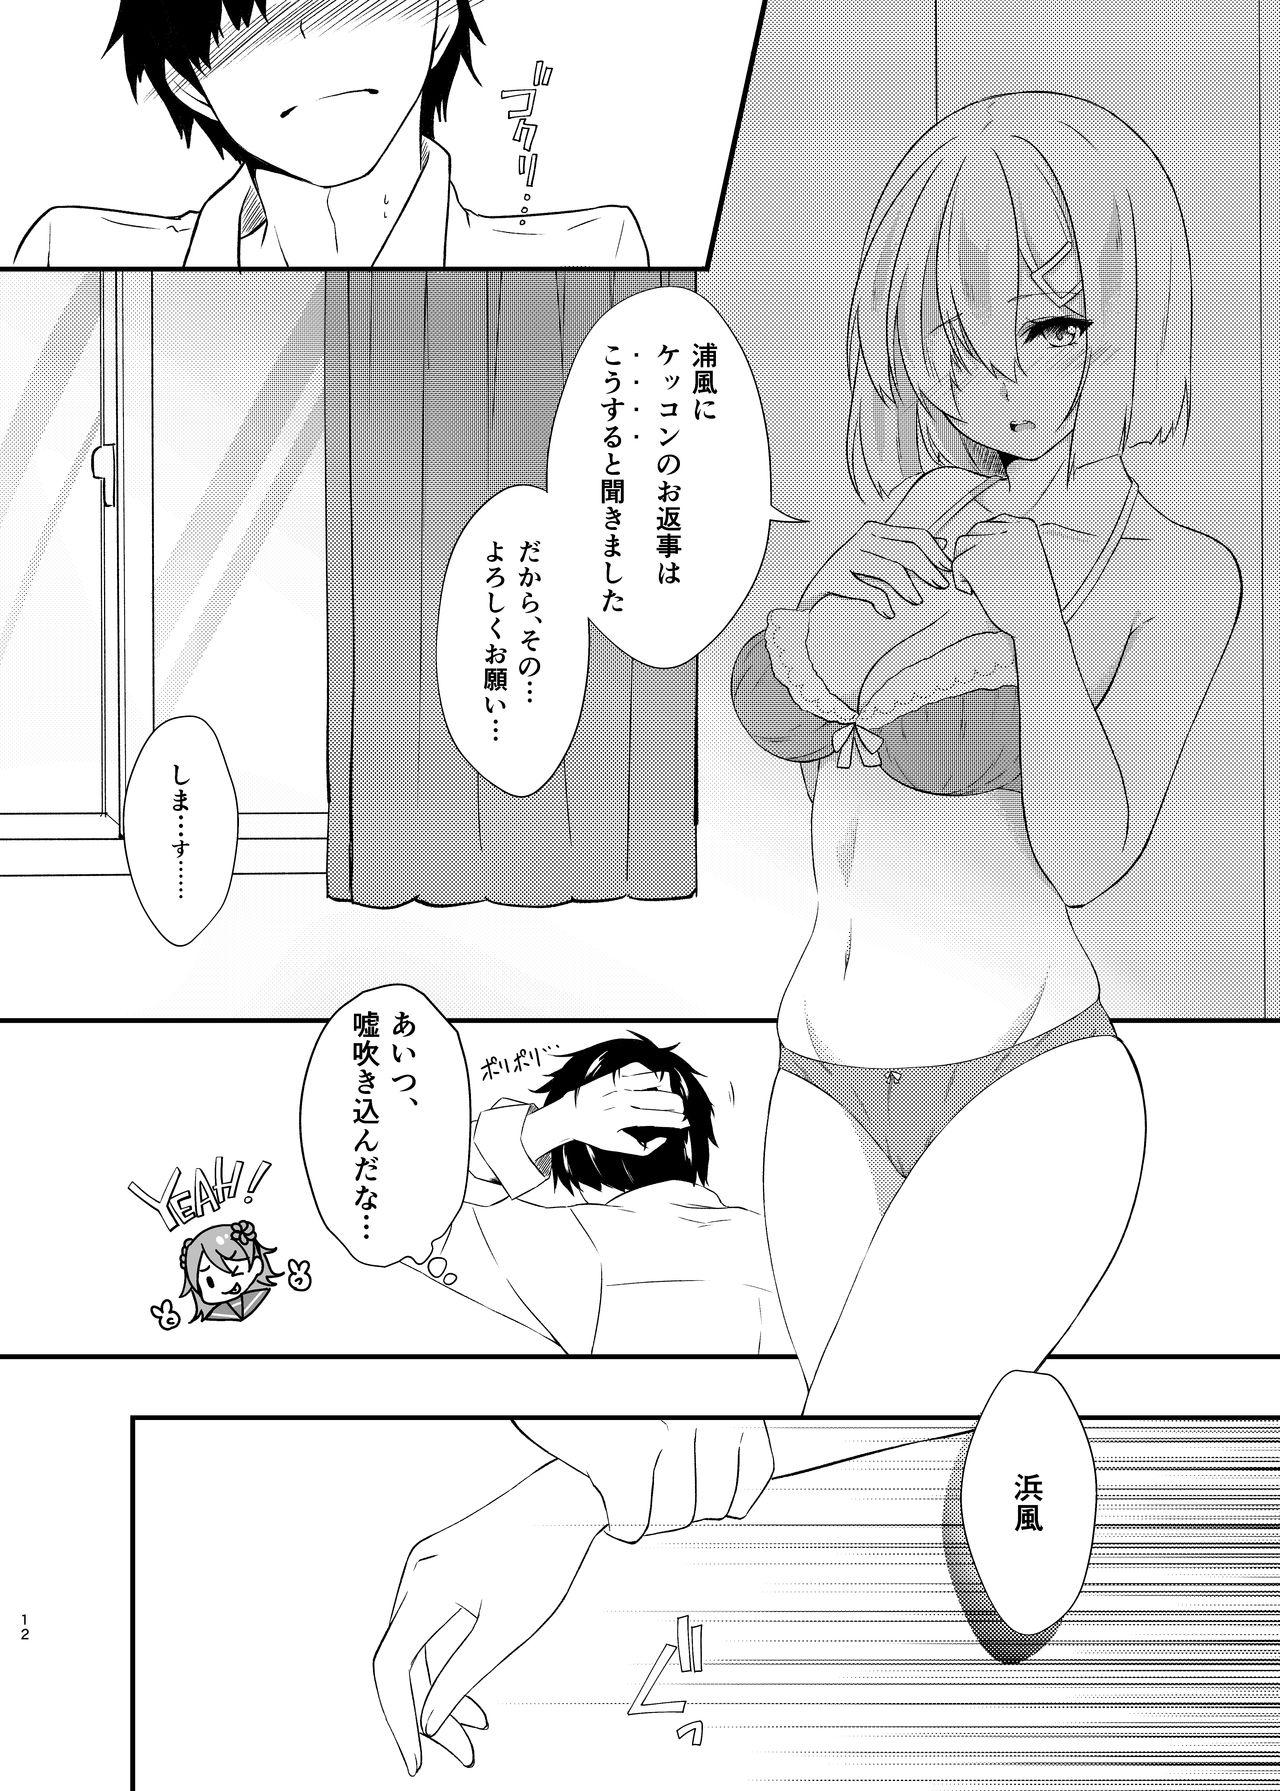 Stepmom a happy ending - Kantai collection Asslicking - Page 11